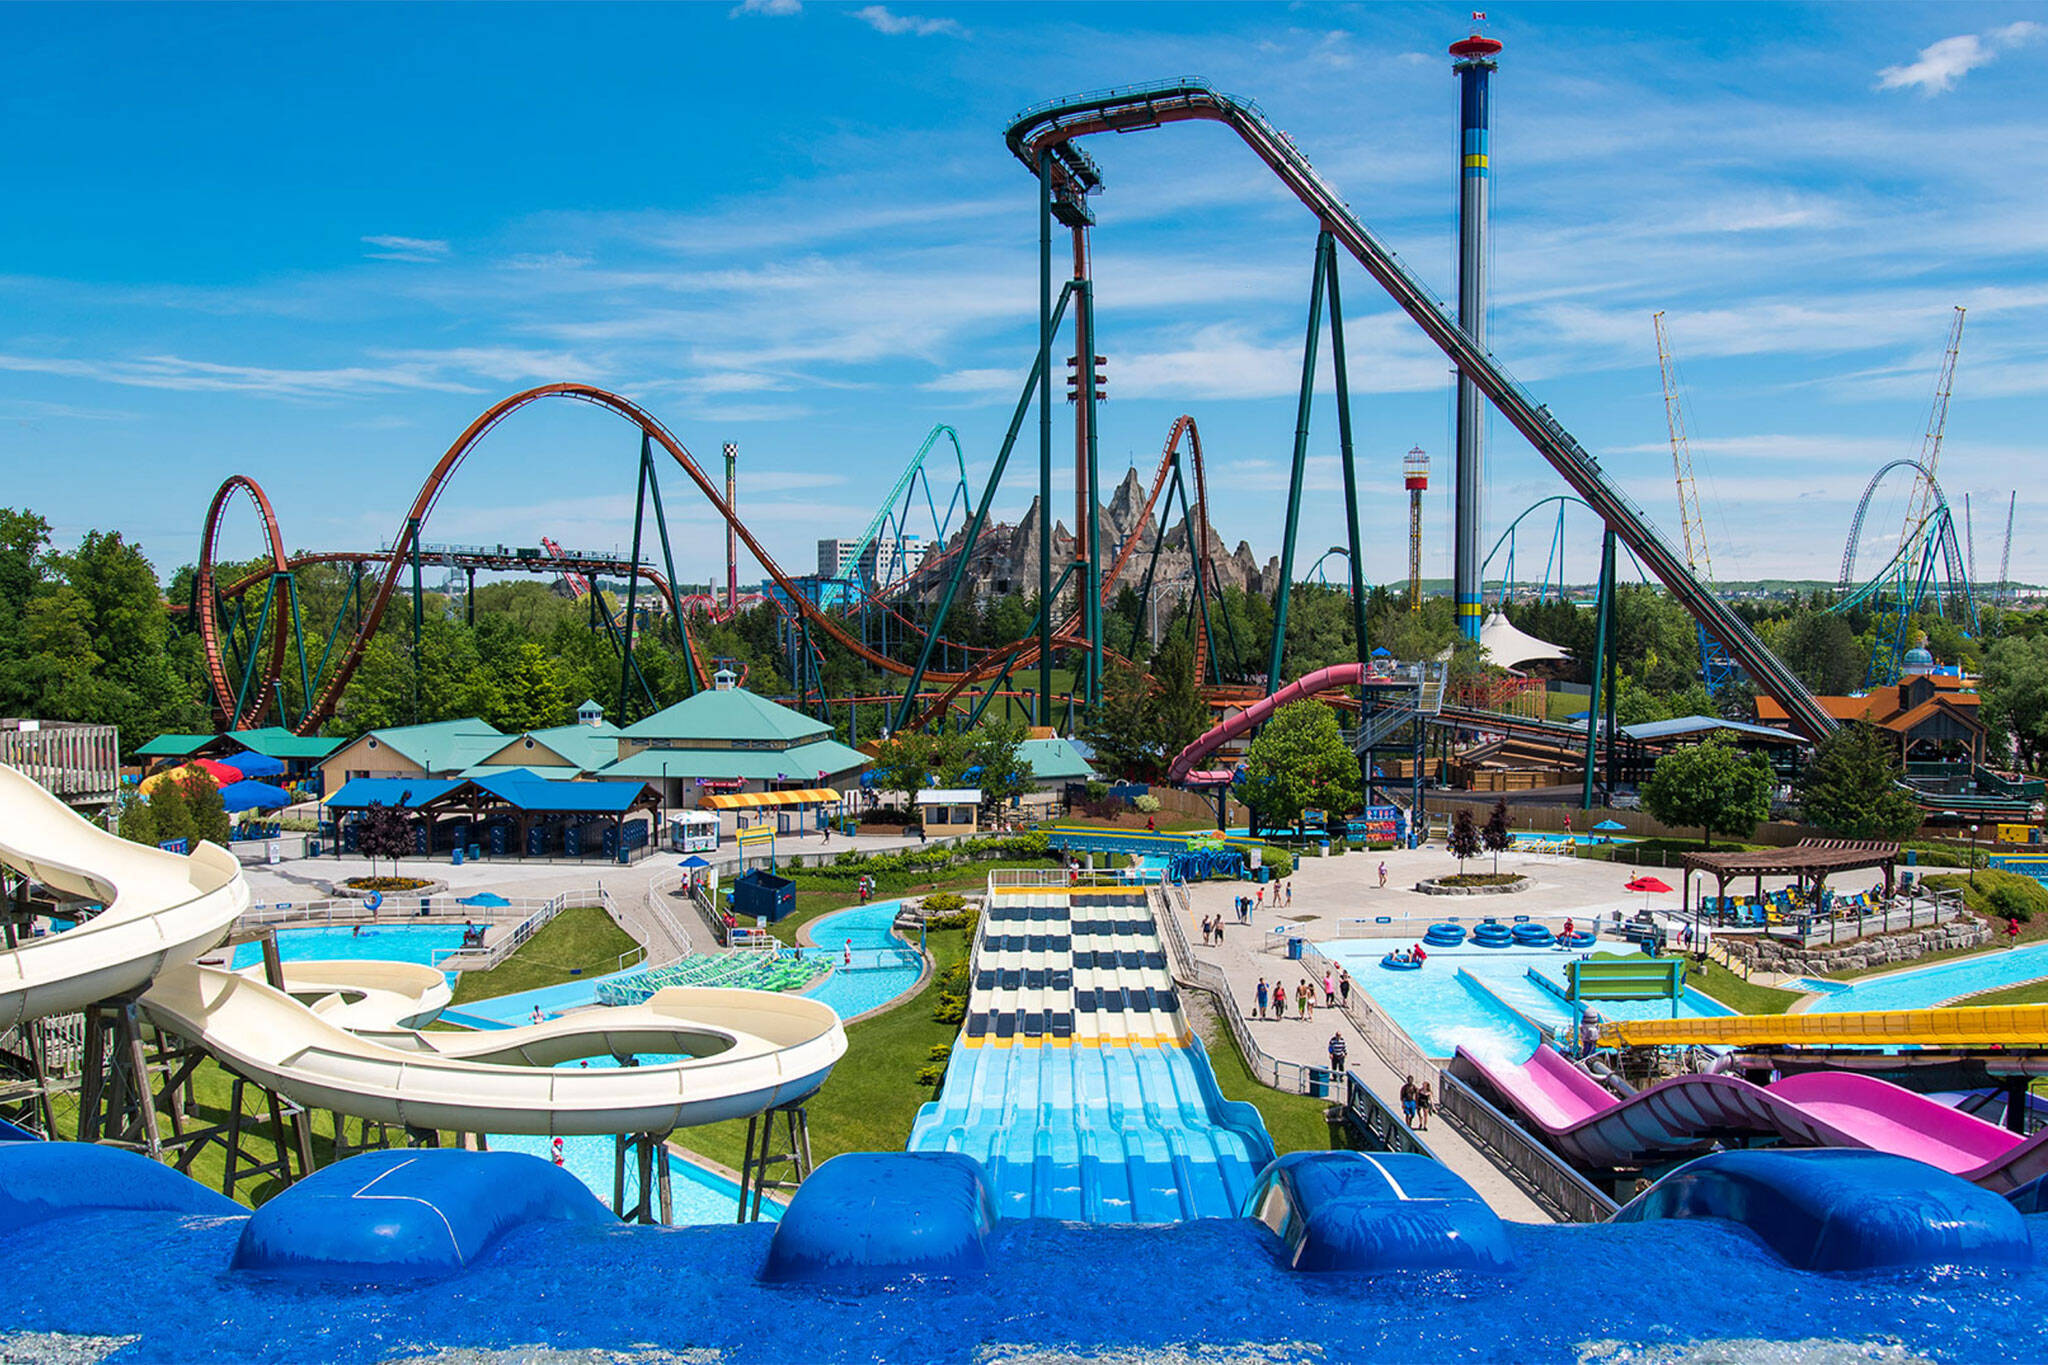 Canada's Wonderland opens for the season next month and here's what's